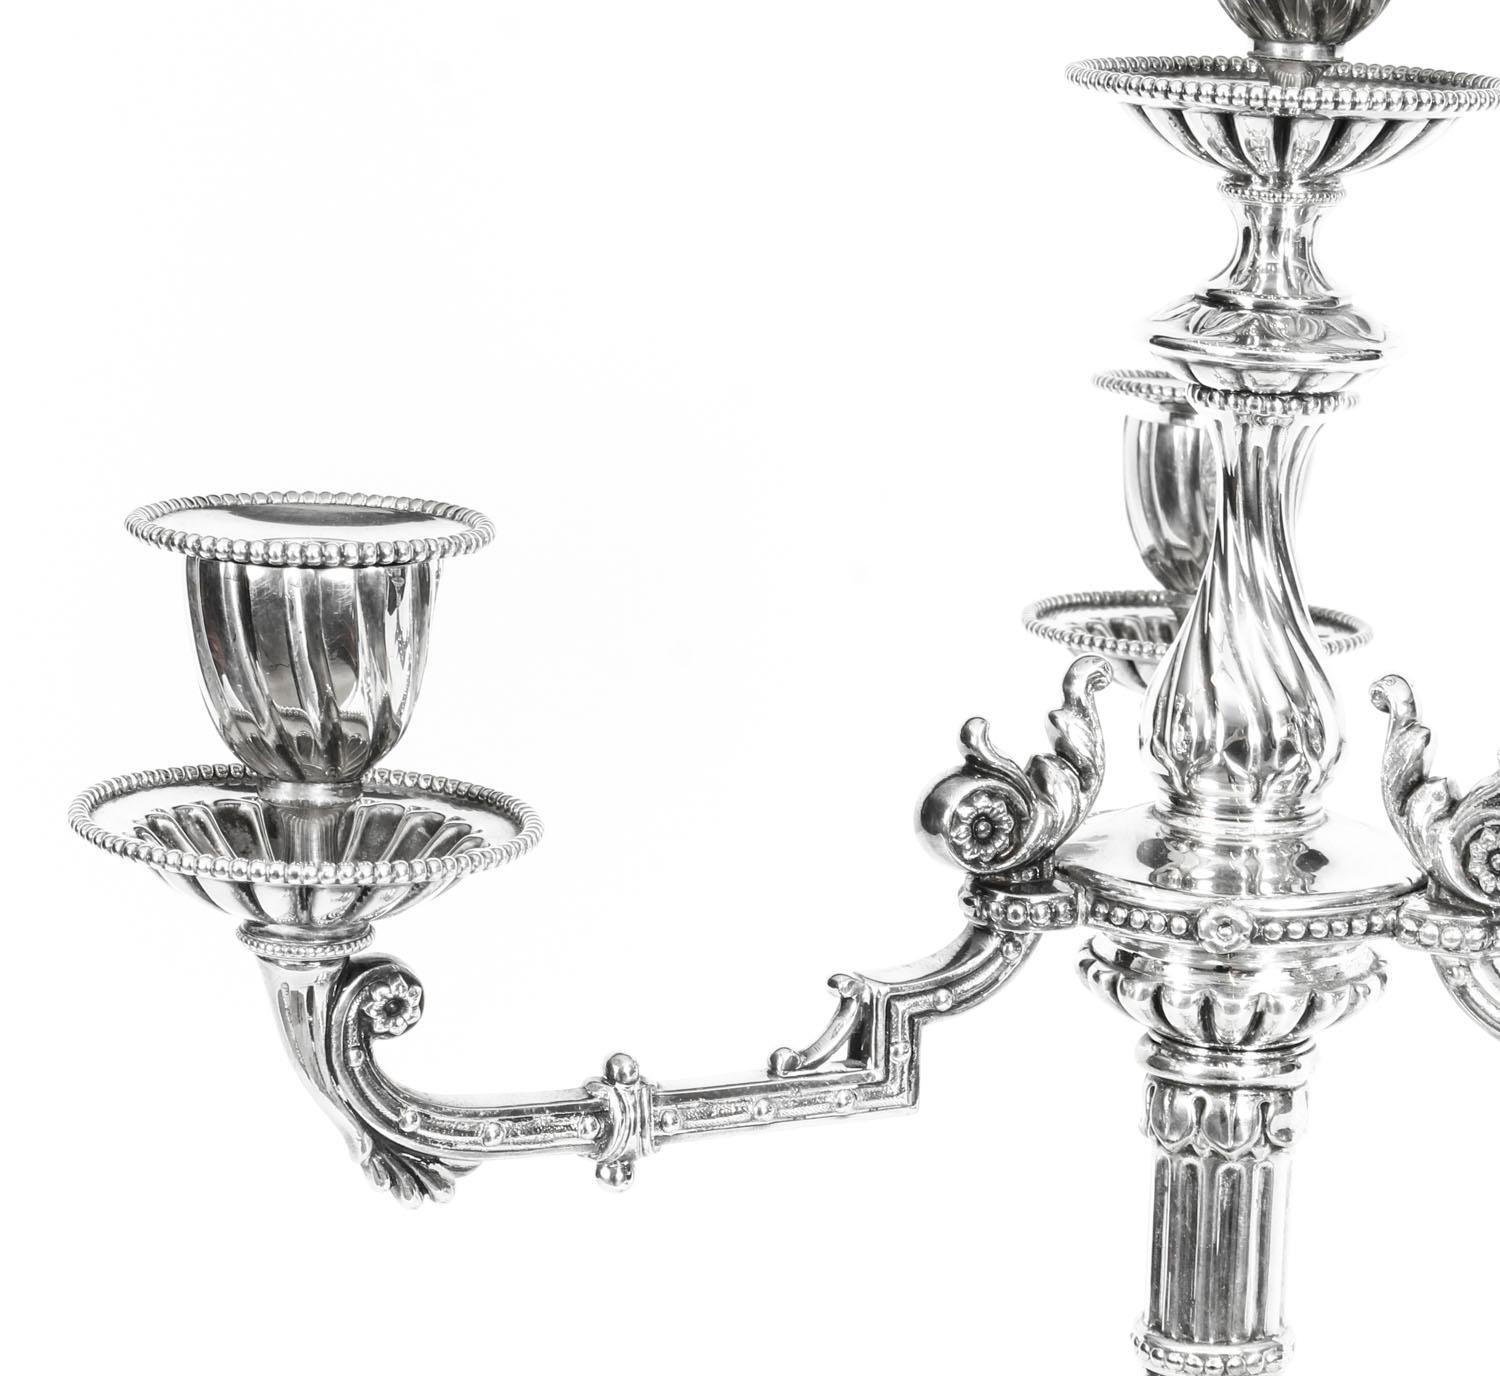 Late 19th Century 19th Century Pair of Neoclasscal Silver Plated 4-Light Candelabra Hodd & Linley